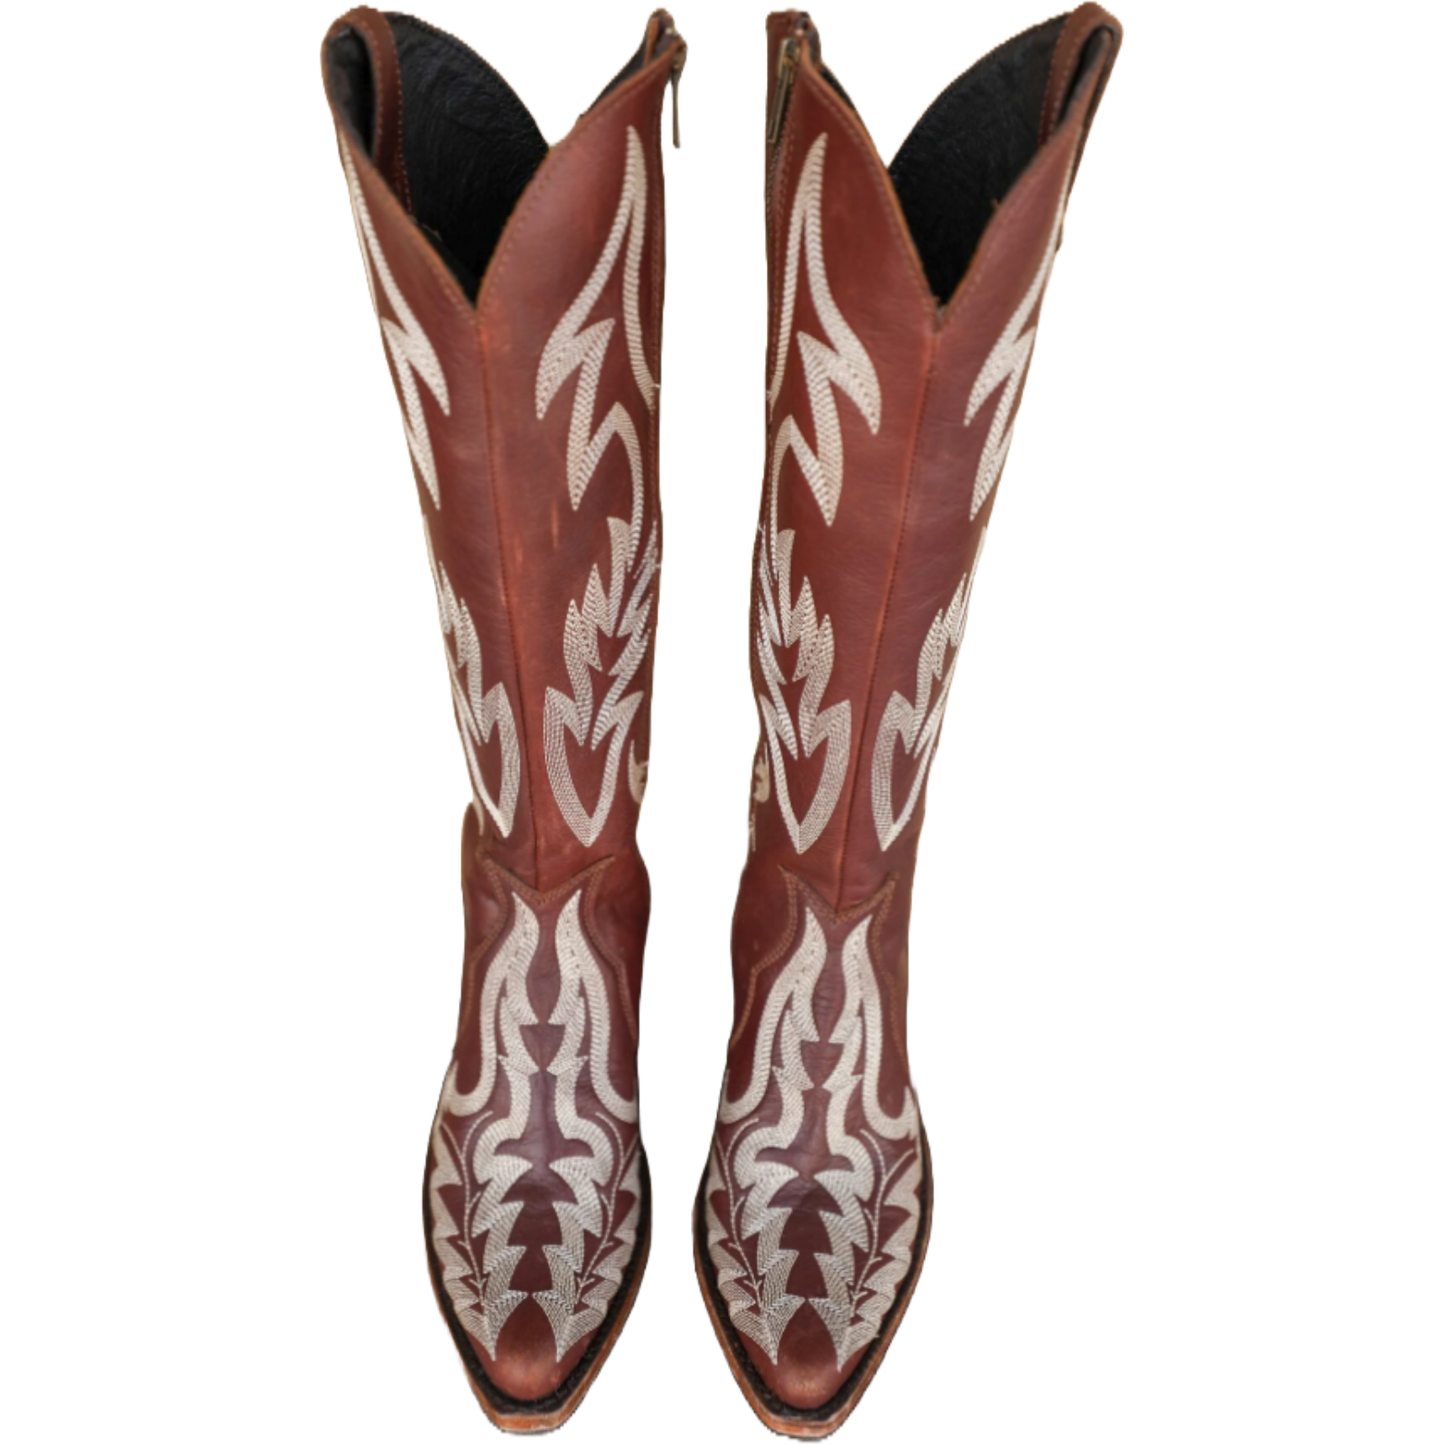 Liberty Black Ladies Titania Shedron Red Western Leather Boot LB-7129173D